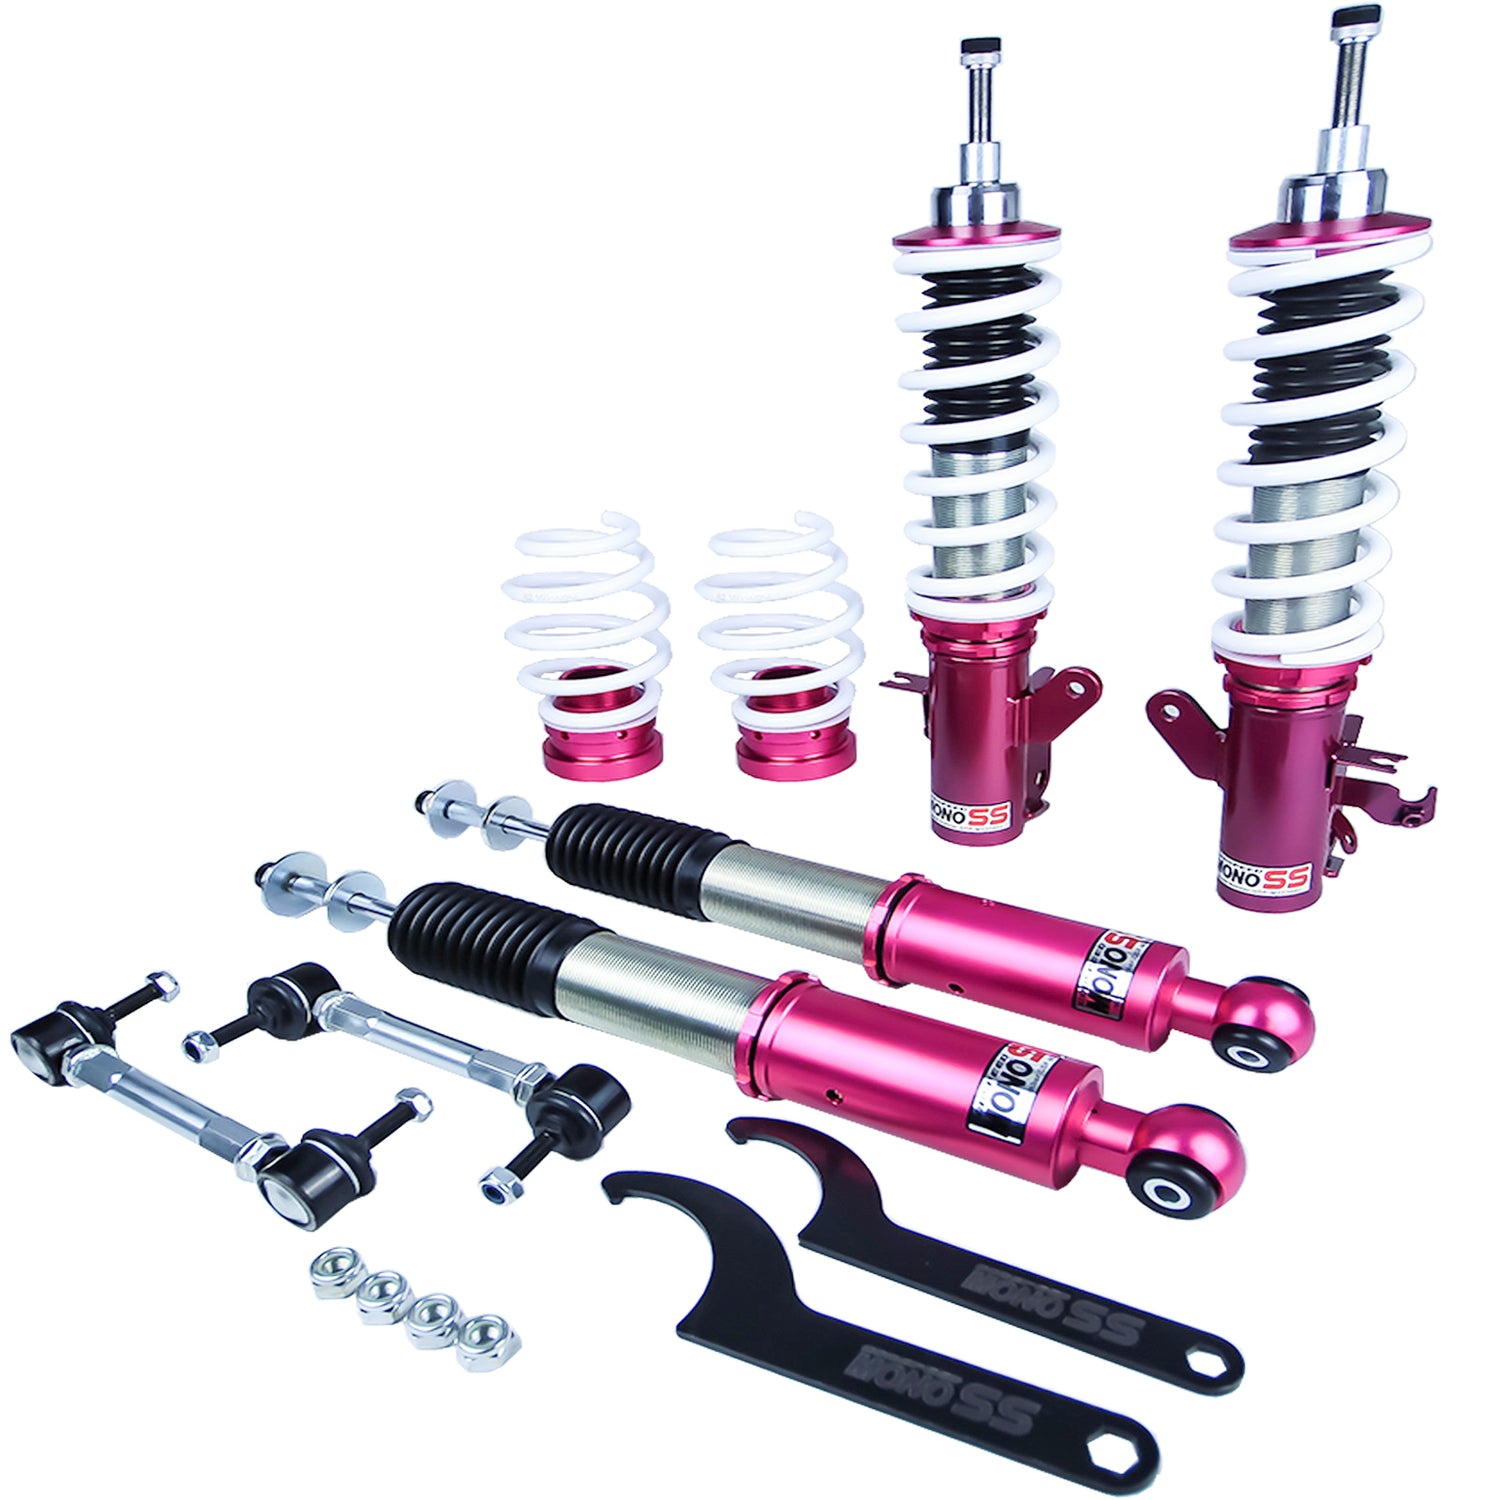 Godspeed MSS0660 MonoSS Coilover Lowering Kit, Fully Adjustable, Ride Height, Spring Tension And 16 Click Damping, Honda CRZ(ZF1) 2010-17